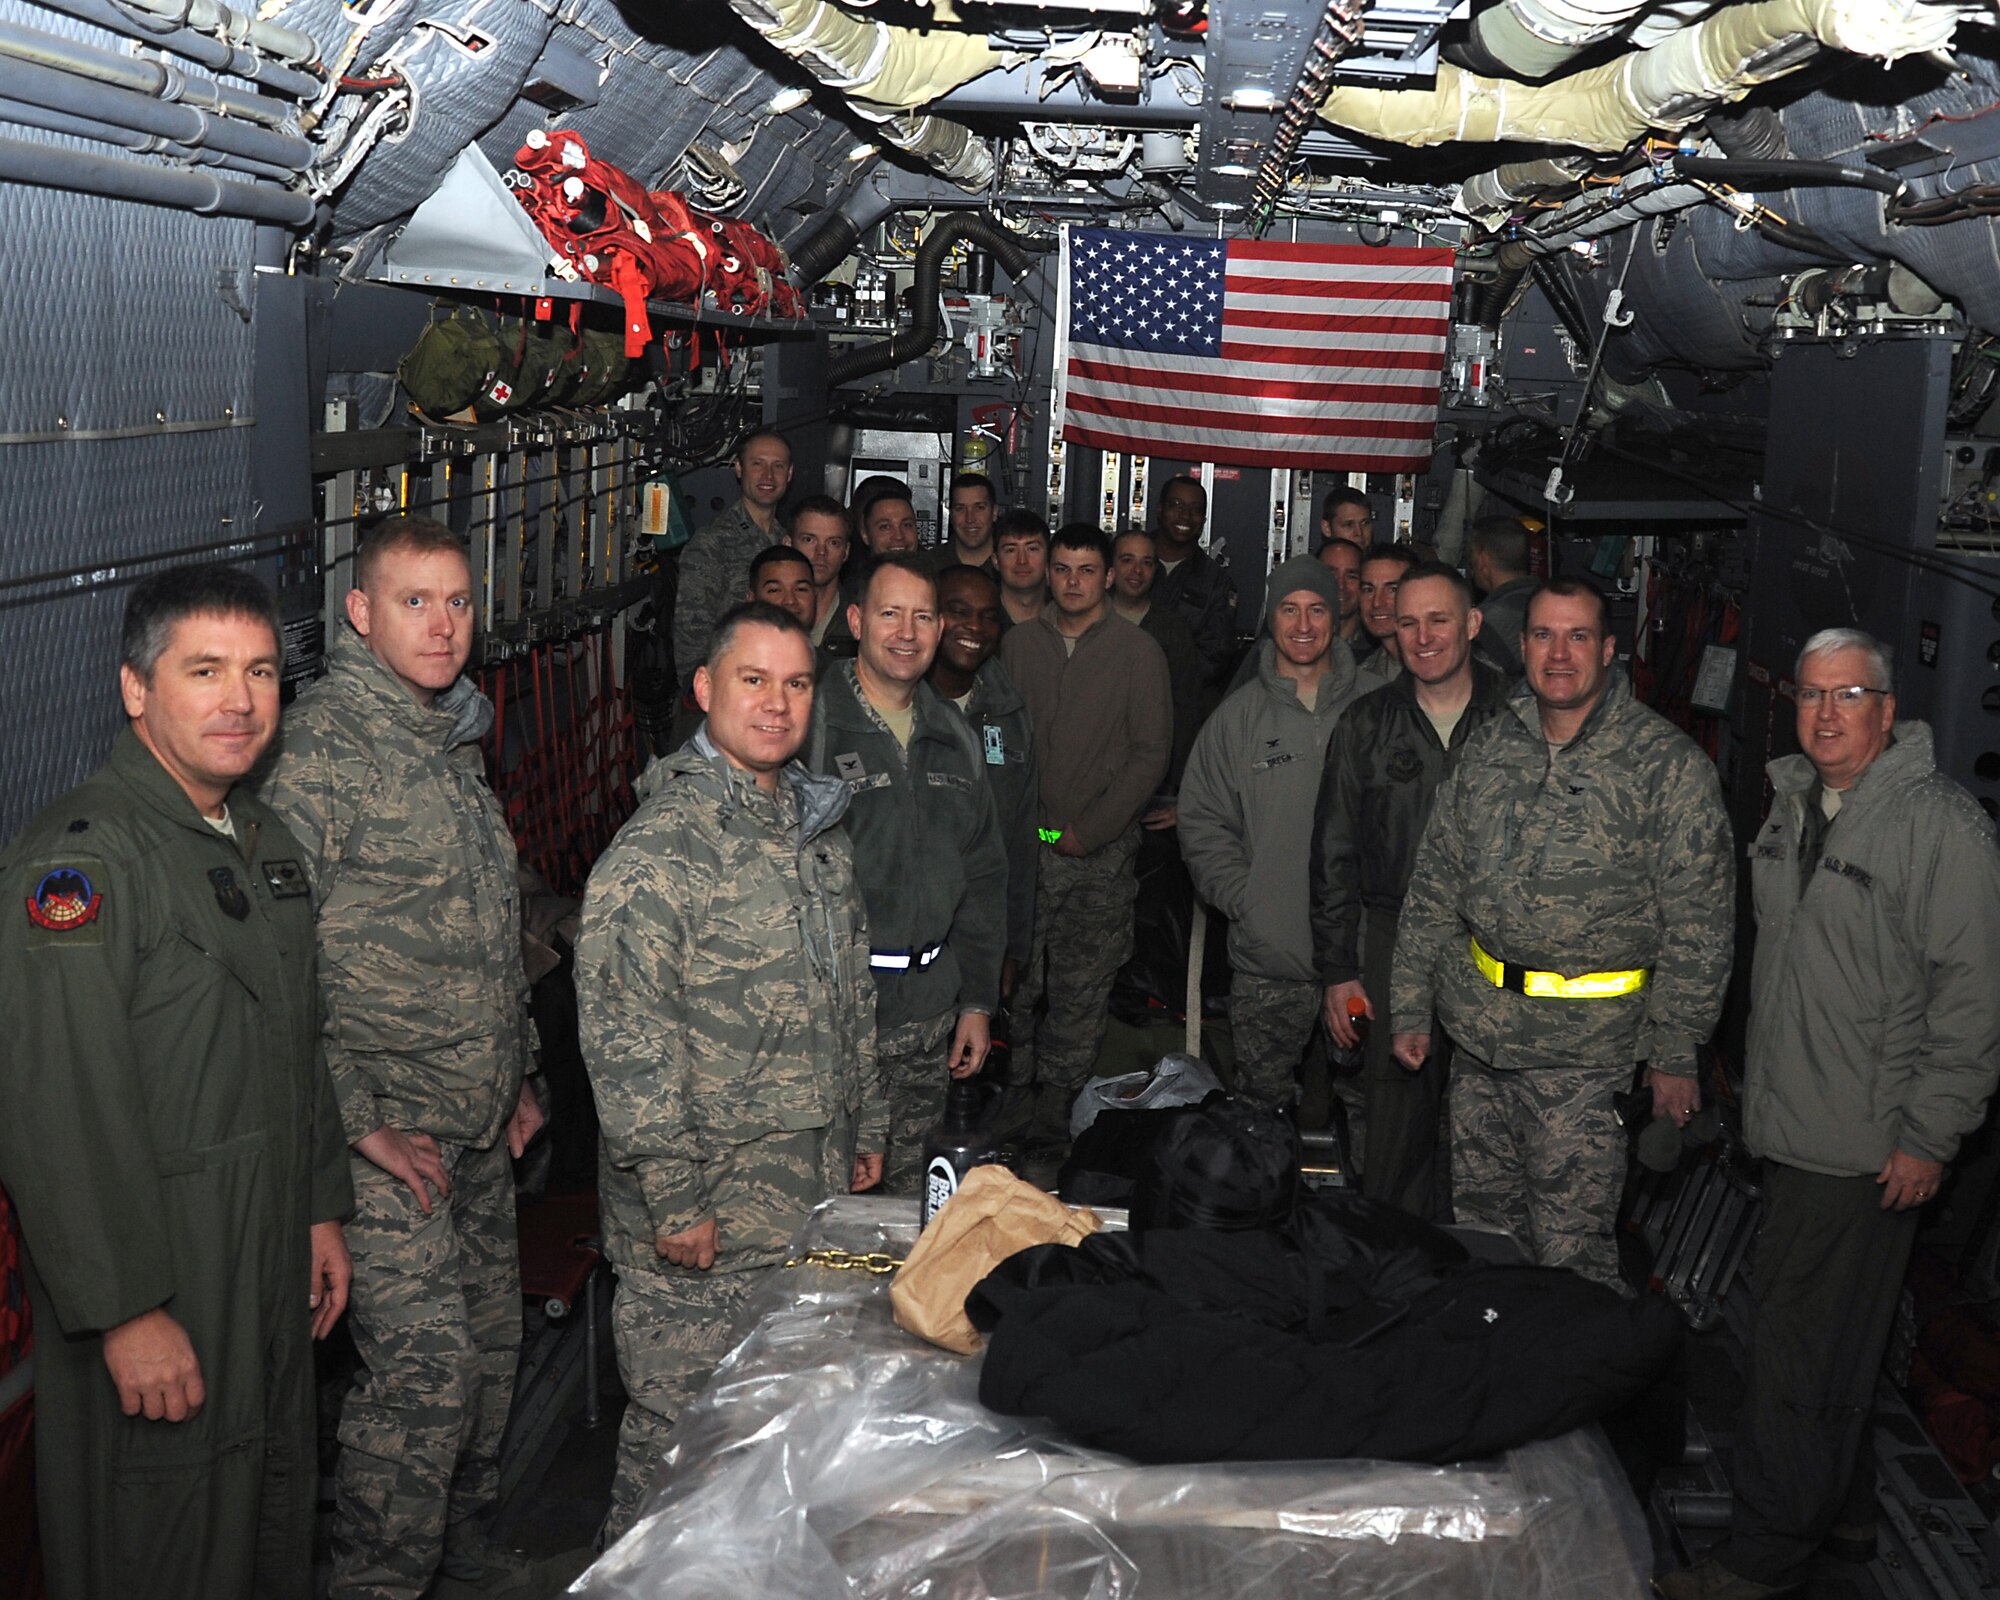 Leadership from the 352nd Special Operations Group  and the 100th Air Refueling Wing gathered on board Jan. 8, 2015, to respectfully say goodbye before the final MC-130H Combat Talon II departs RAF Mildenhall for Hurlburt Field, Florida. This departure flight concludes its tenure at the 7th Special Operations Squadron at RAF Mildenhall. The MC-130H, tail number 0195, is the last of its kind to leave the European theater. (U.S. Air Force photo by Tech. Sgt. Stacia Zachary/Released)